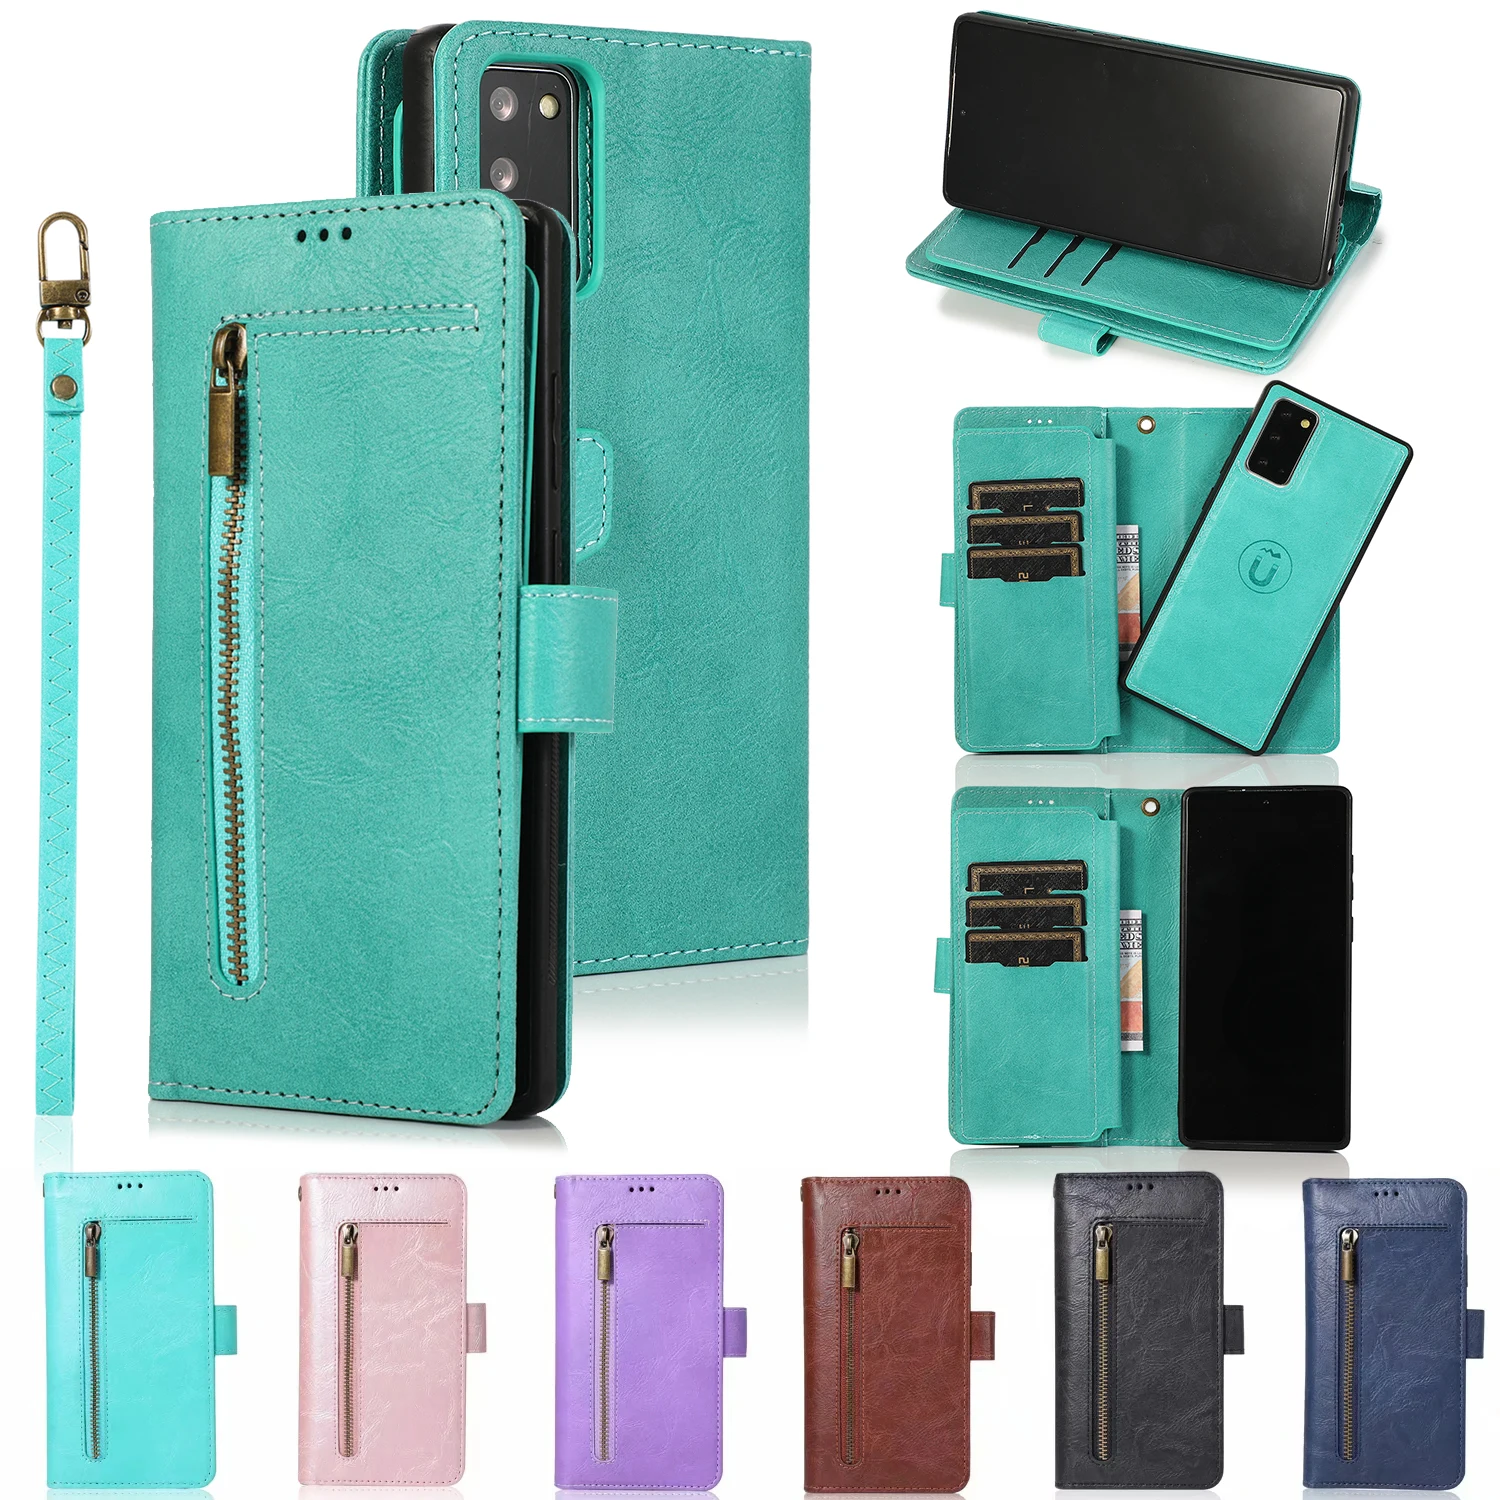 

Luxury Magnetic Flip Wallet Case For Samsung Note20 Ultra Note10 Plus Note9 Note8 Leather Card insertion Phone Cover